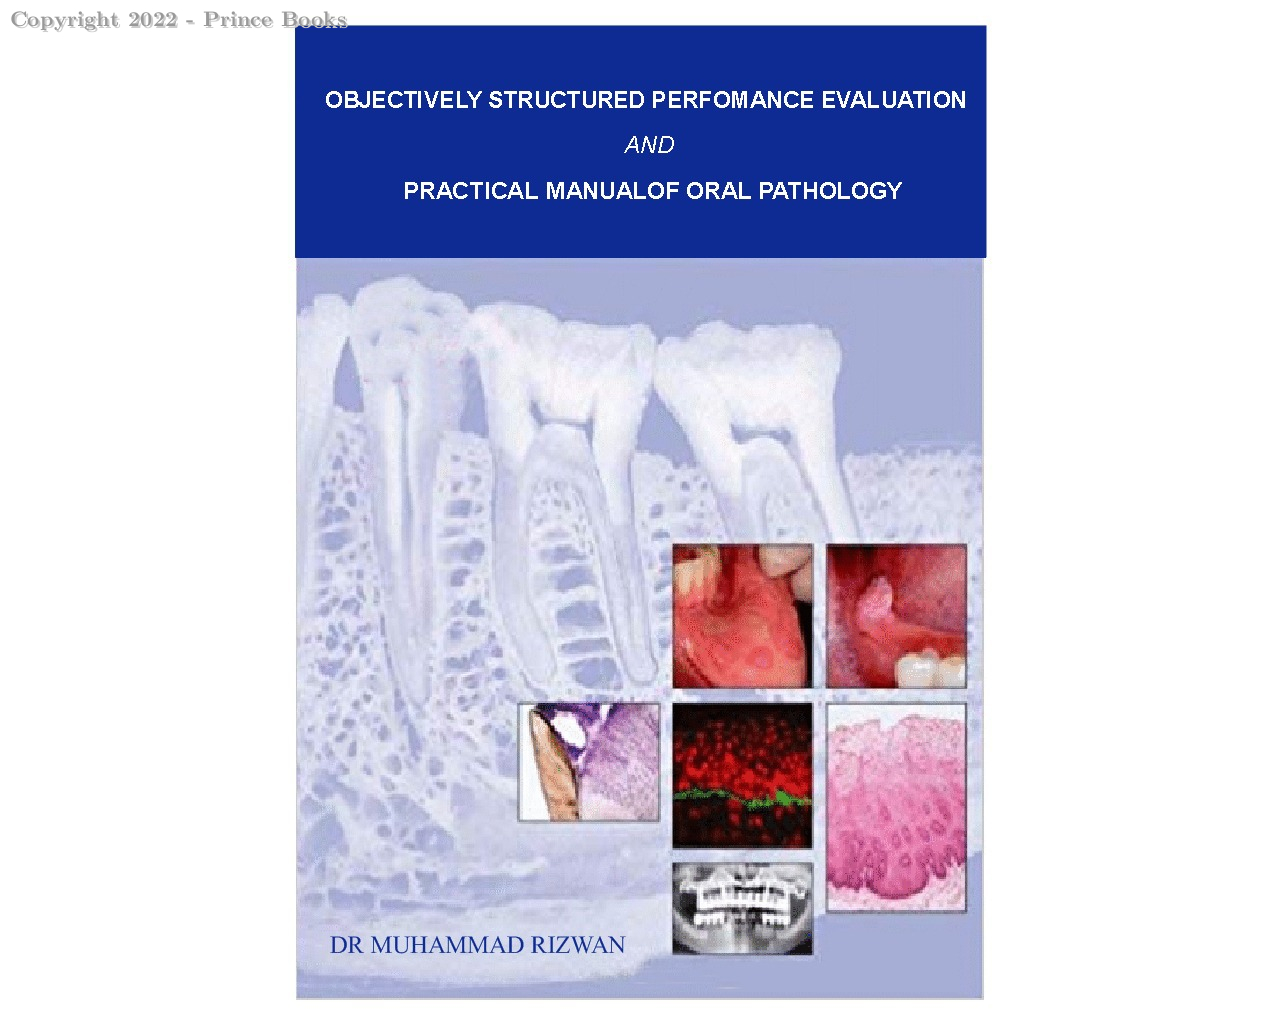 OBJECTIVELY STRUCTURED PERFORMANCE EVALUATION AND PRACTICAL MANUAL OF ORAL PATHOLOGY